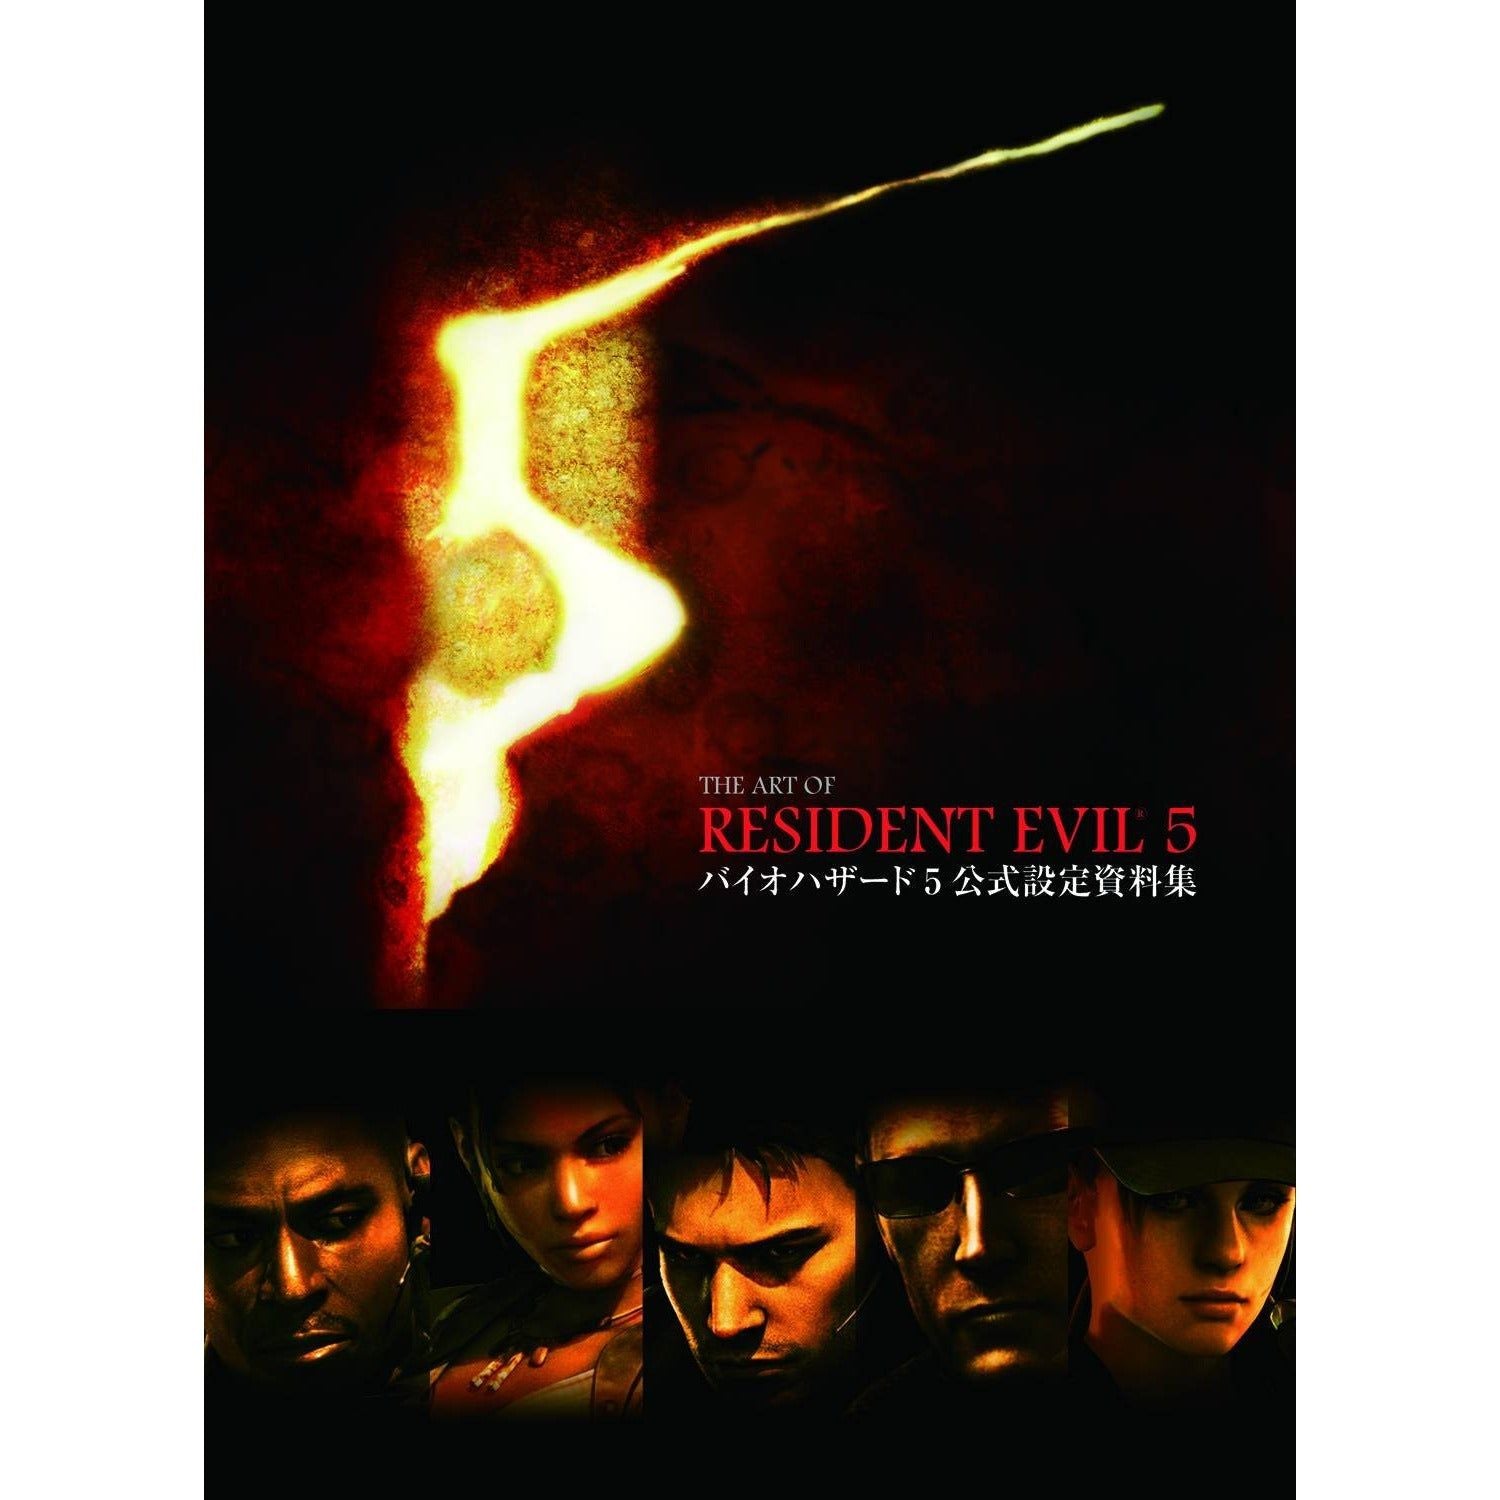 The Art of Resident Evil 5 by Udon Entertainment